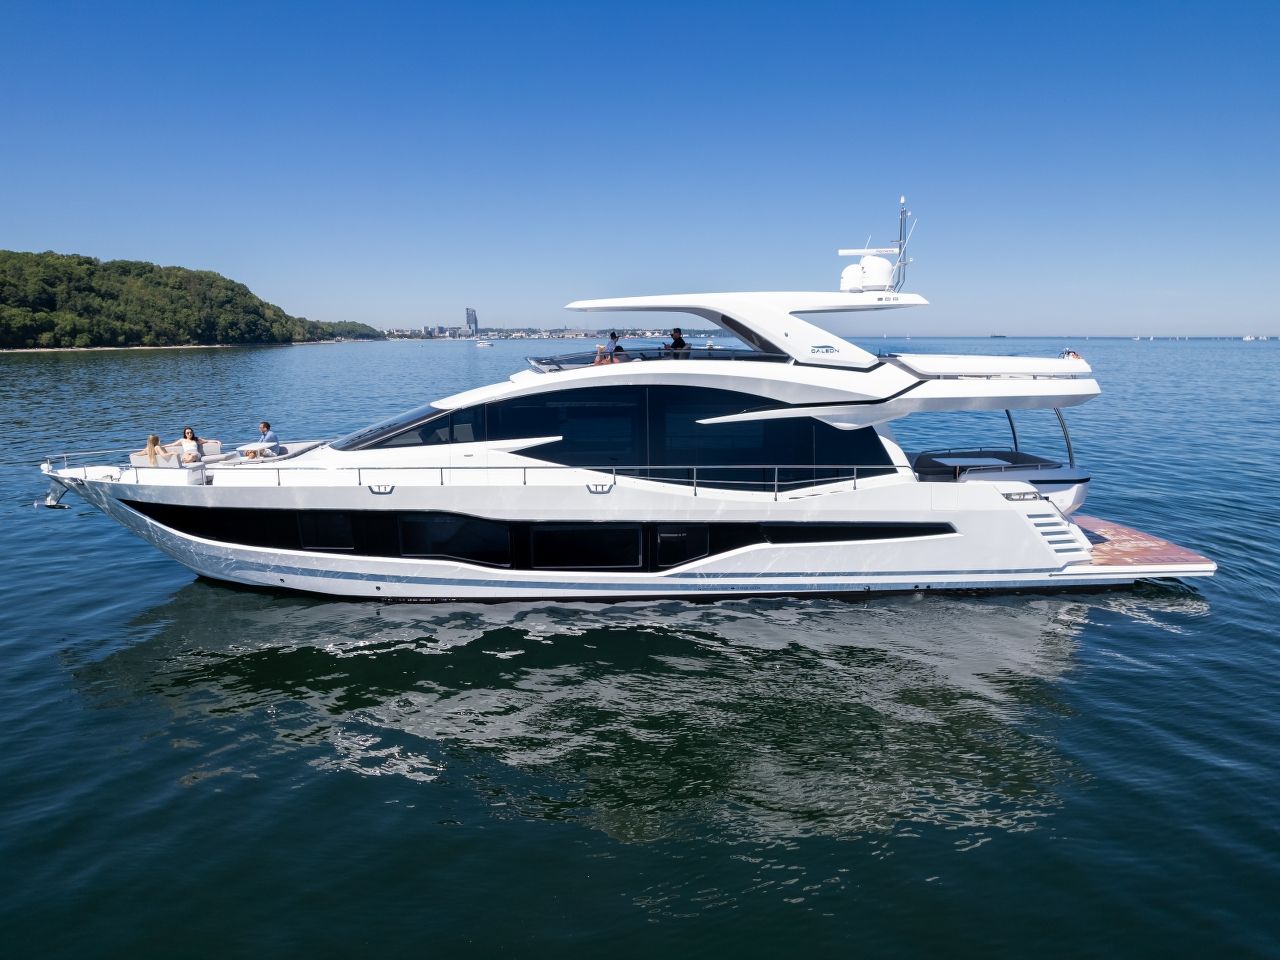 Galeon 800 FLY2022 for sale: 3315000.-EUR